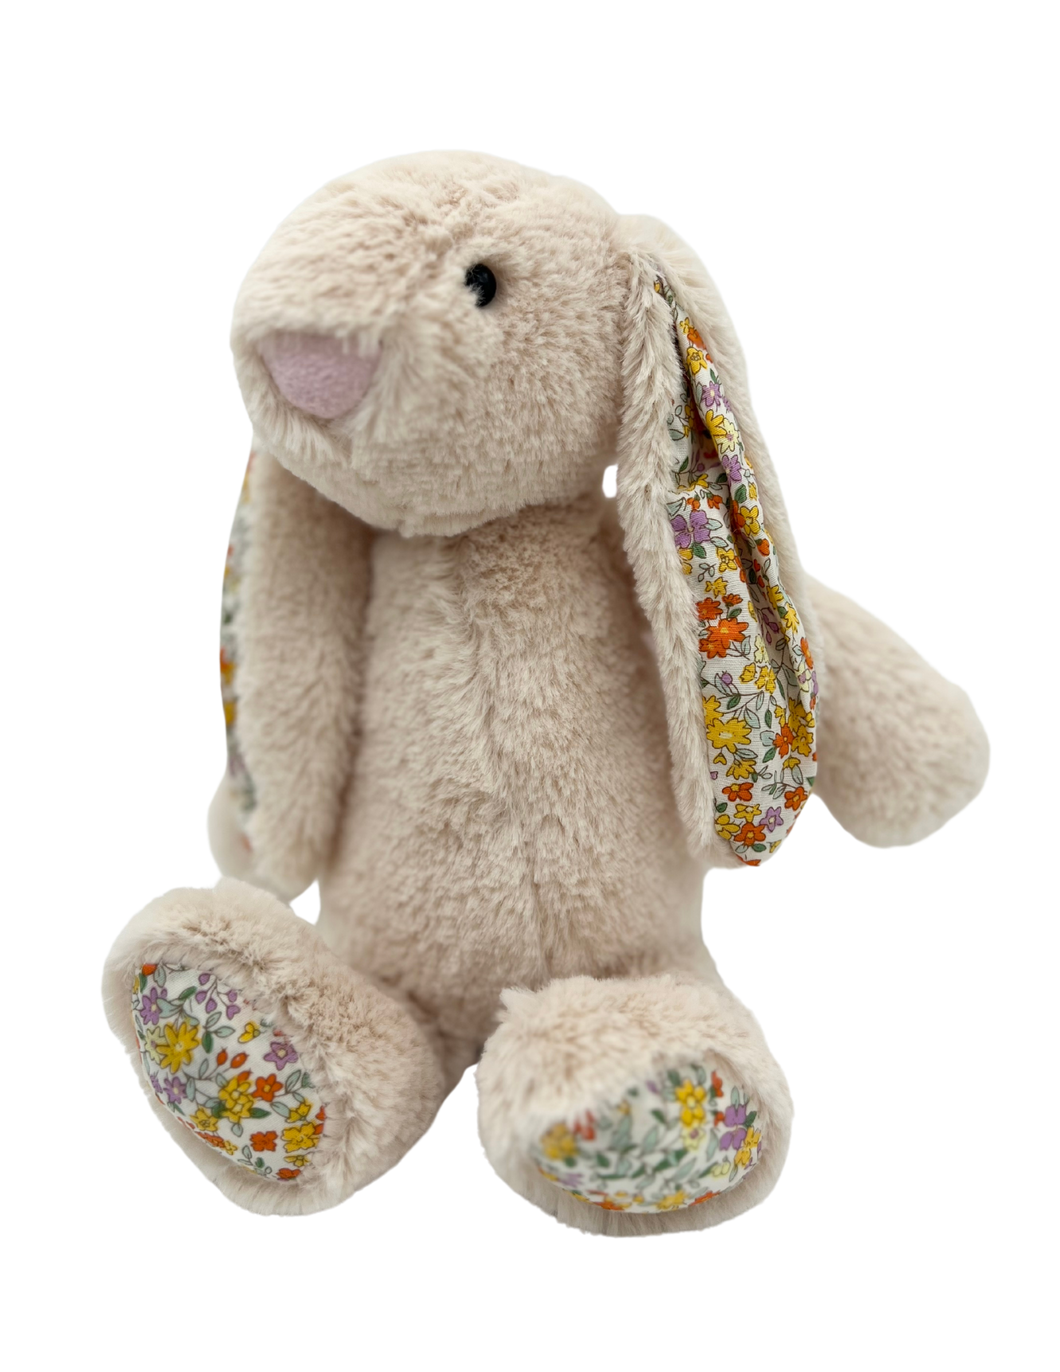 Stuffed Animal- Cream Floral Bunny - CovetedThings